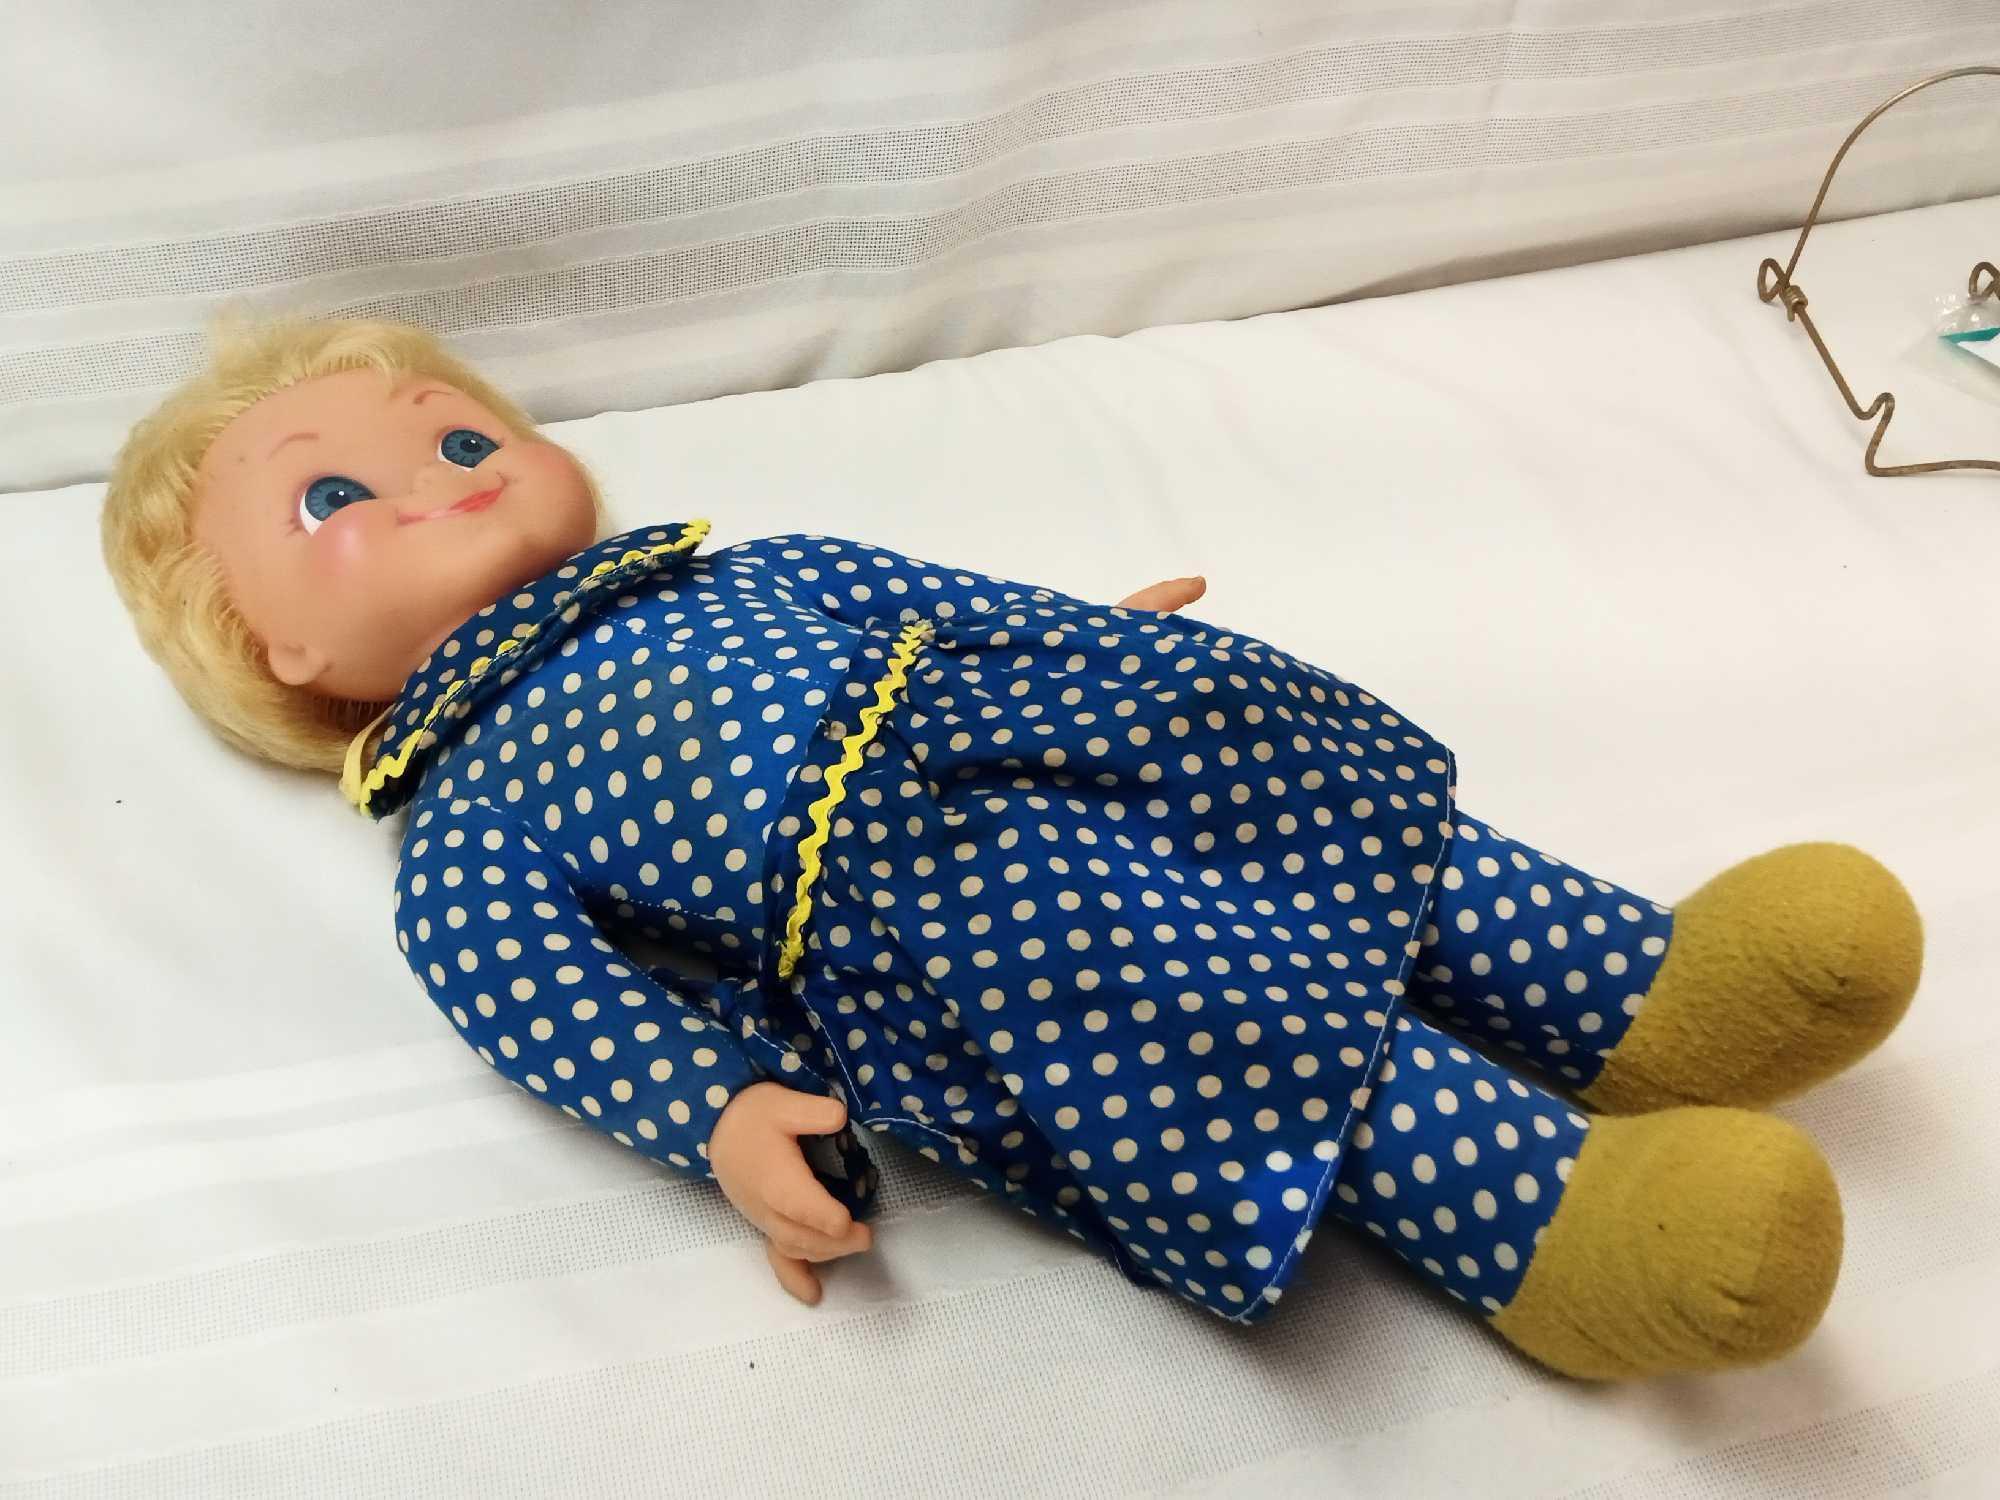 "MRS. BEASLEY"TALKING DOLL(DOES NOT WORK) 20" FROM TV'S FAMILY AFFAIR SHOW